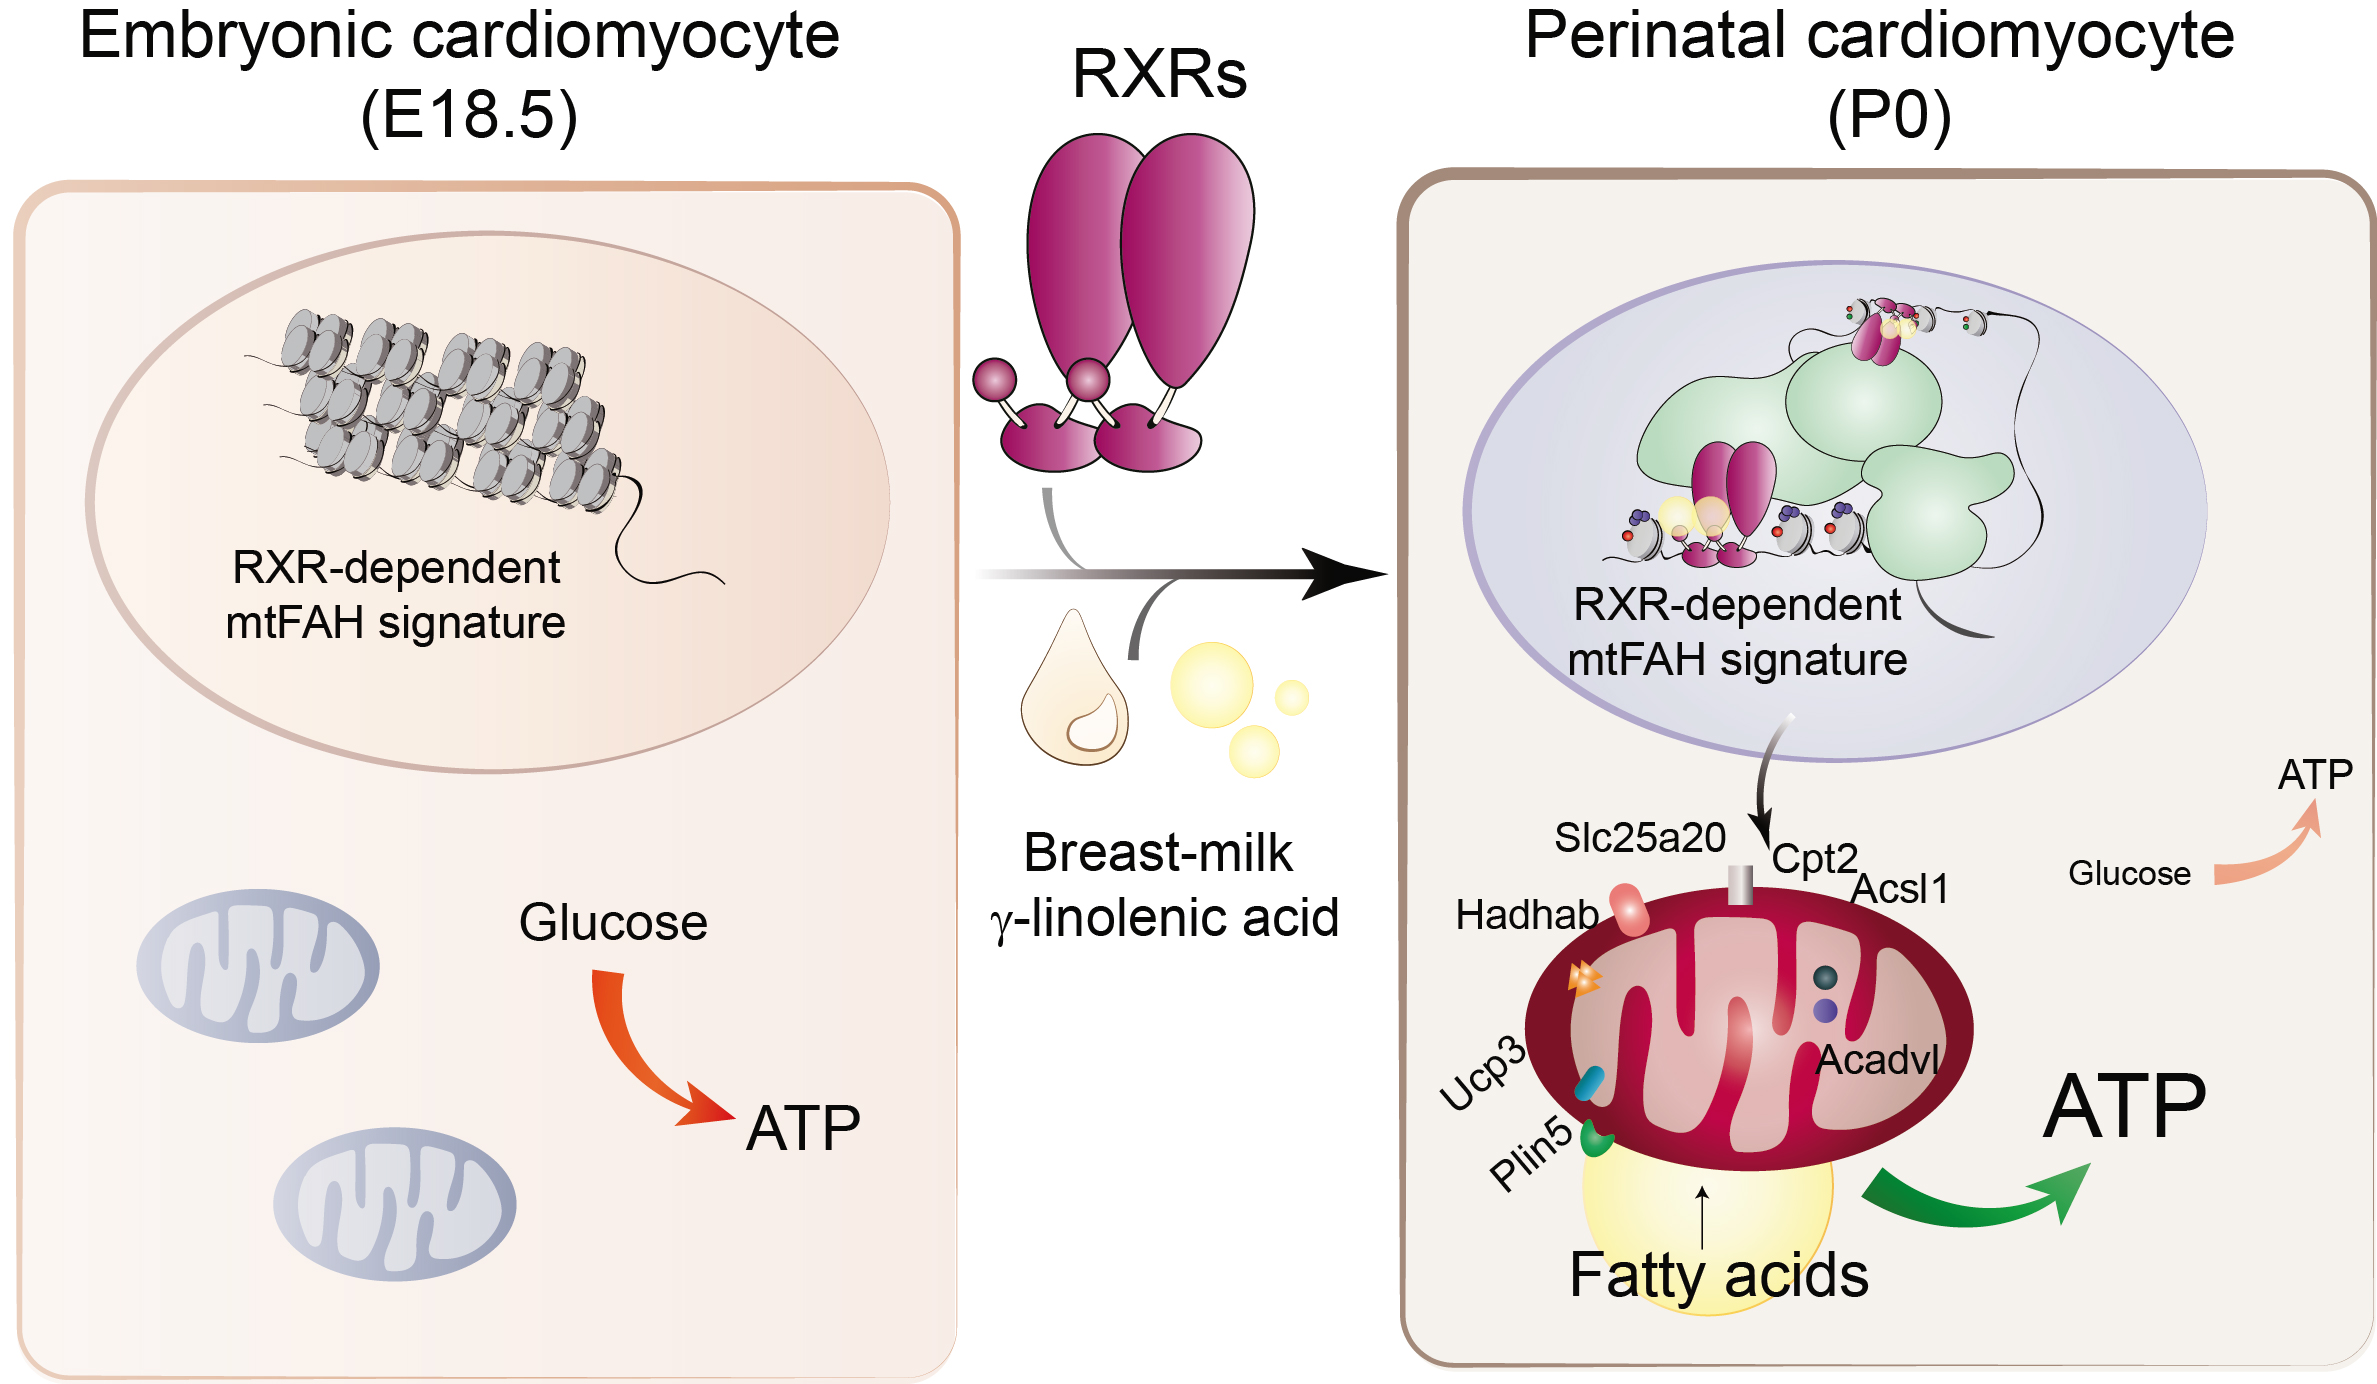 After birth, GLA activates RXR in the postnatal cardiomyocytes. This results in the activation of genetic programs that ensure that the cardiomyocyte mitochondria mature and use lipids as the energy source for the generation of ATP. This metabolic adaptation makes sure that the myocardium is provided with enough energy to sustain the heartbeat outside the womb, thus ensuring postnatal survival.